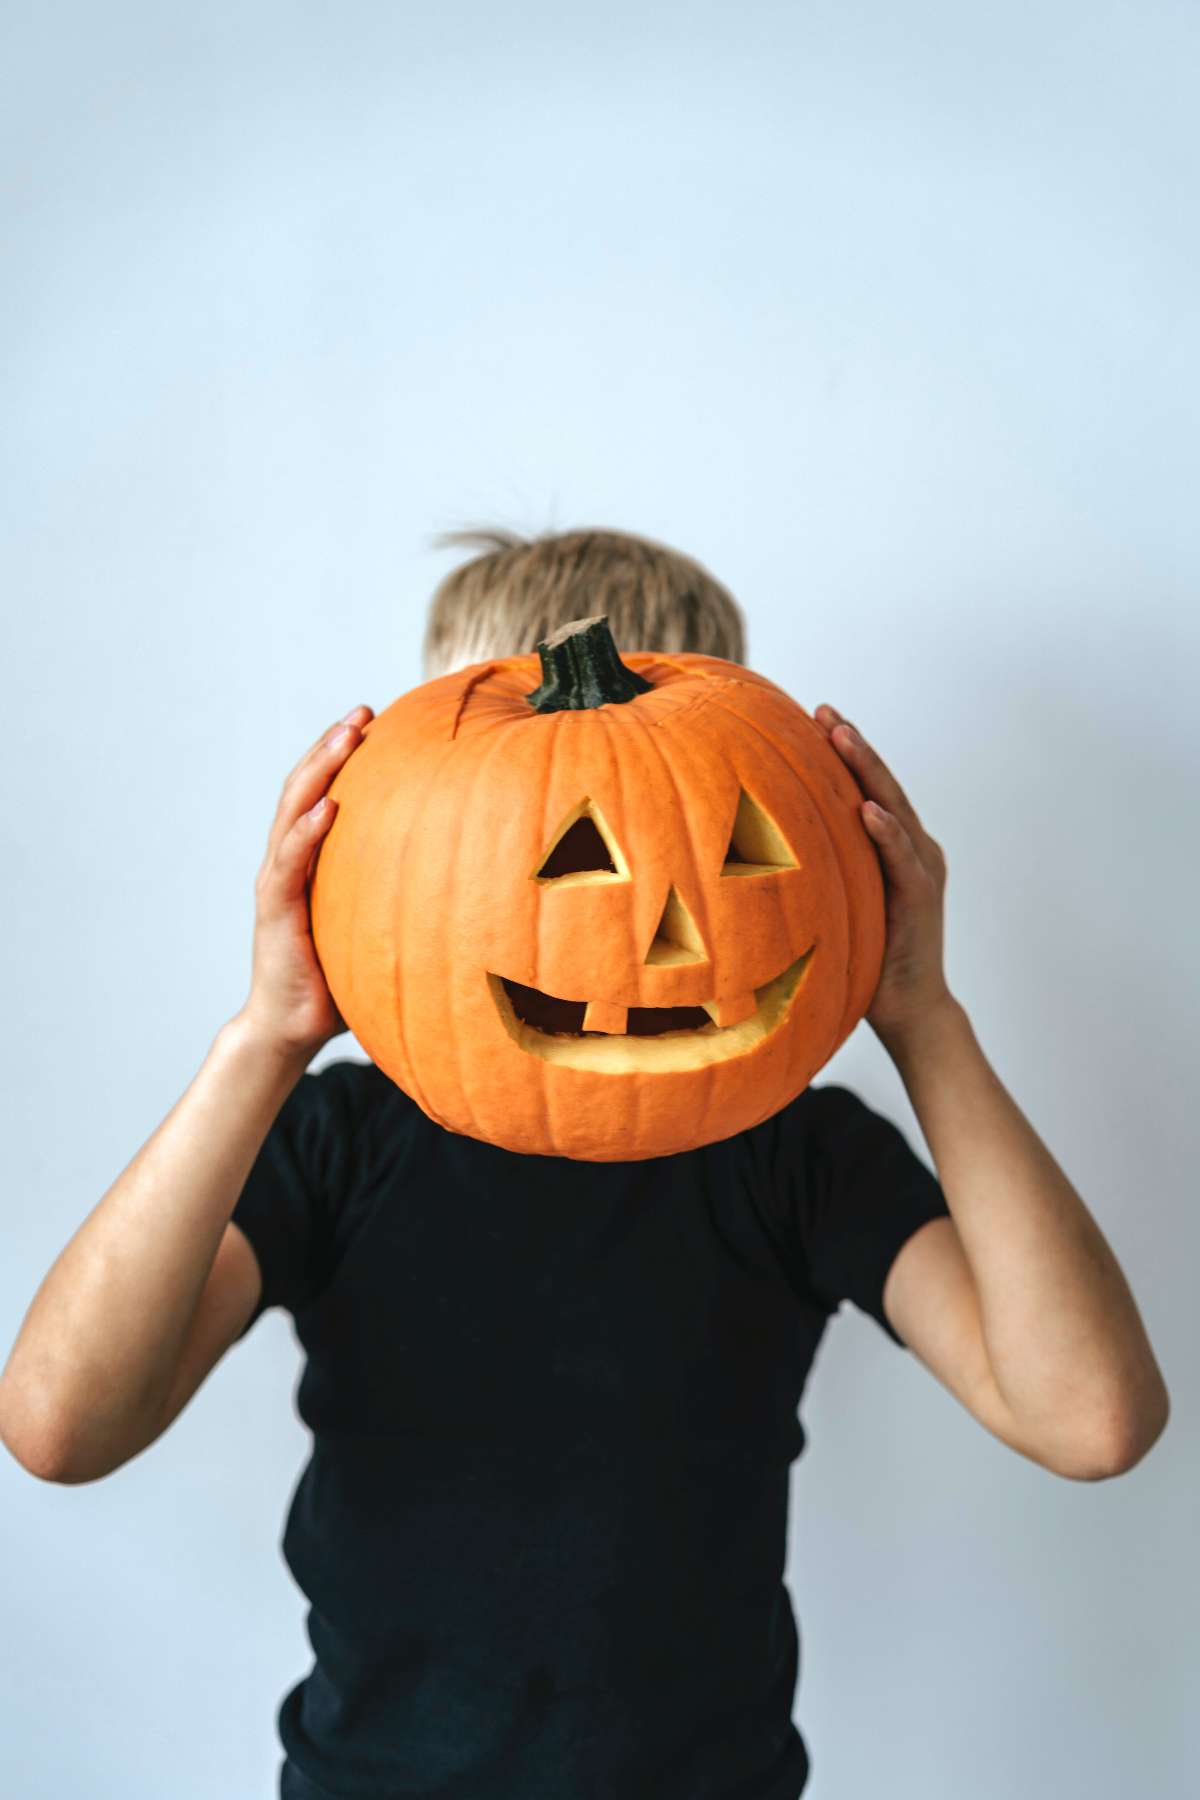 Where to get over pumpkin carving templates